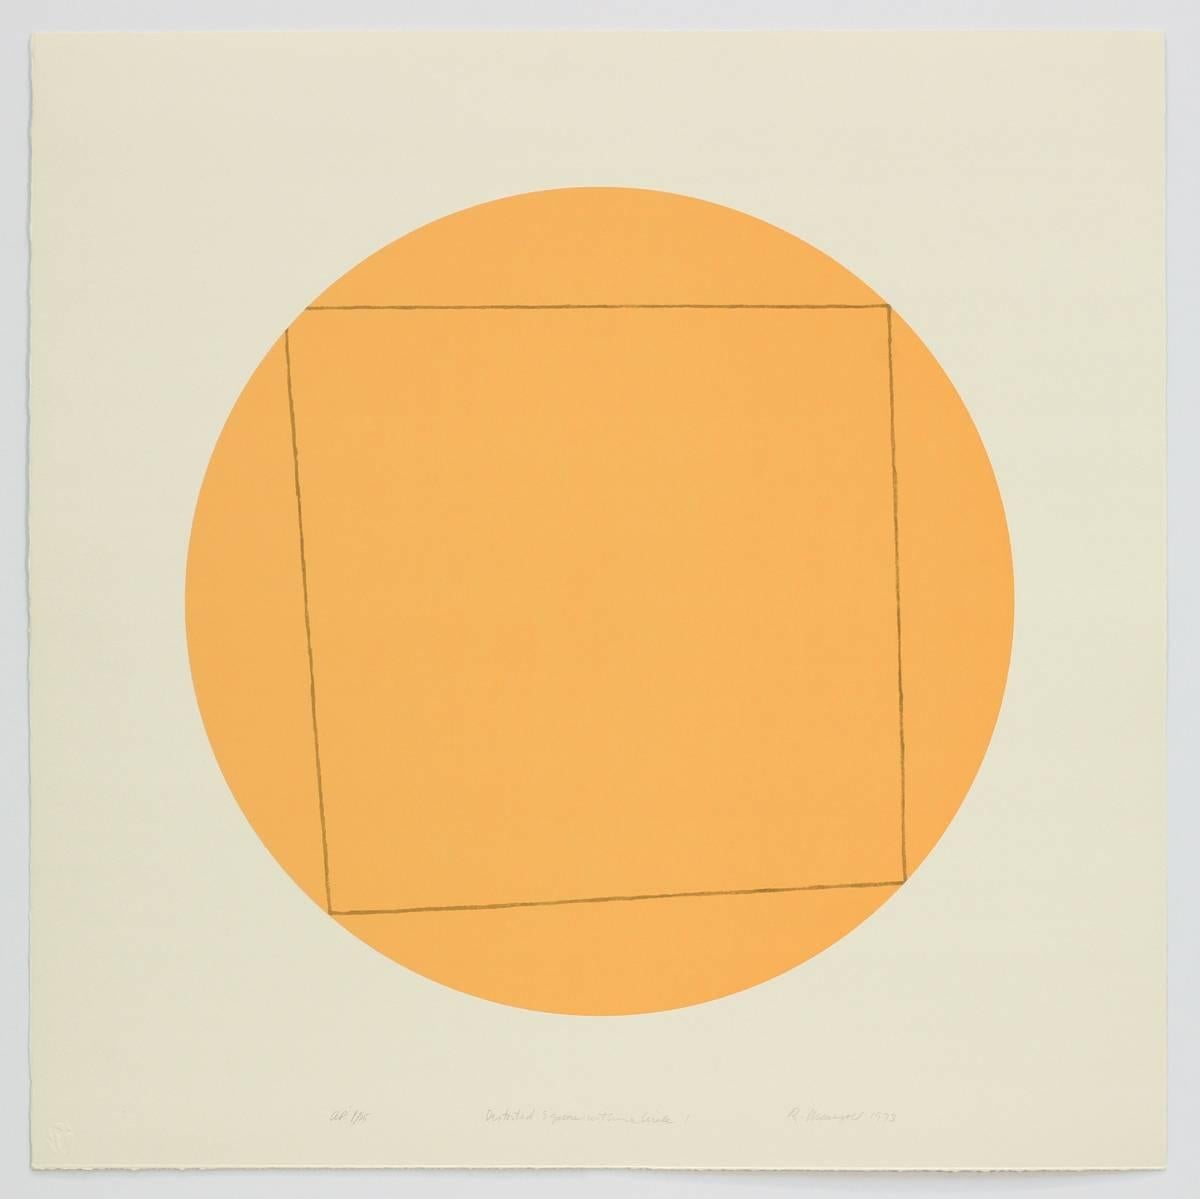 Distorted Square Within A Circle - Minimalist Print by Robert Mangold